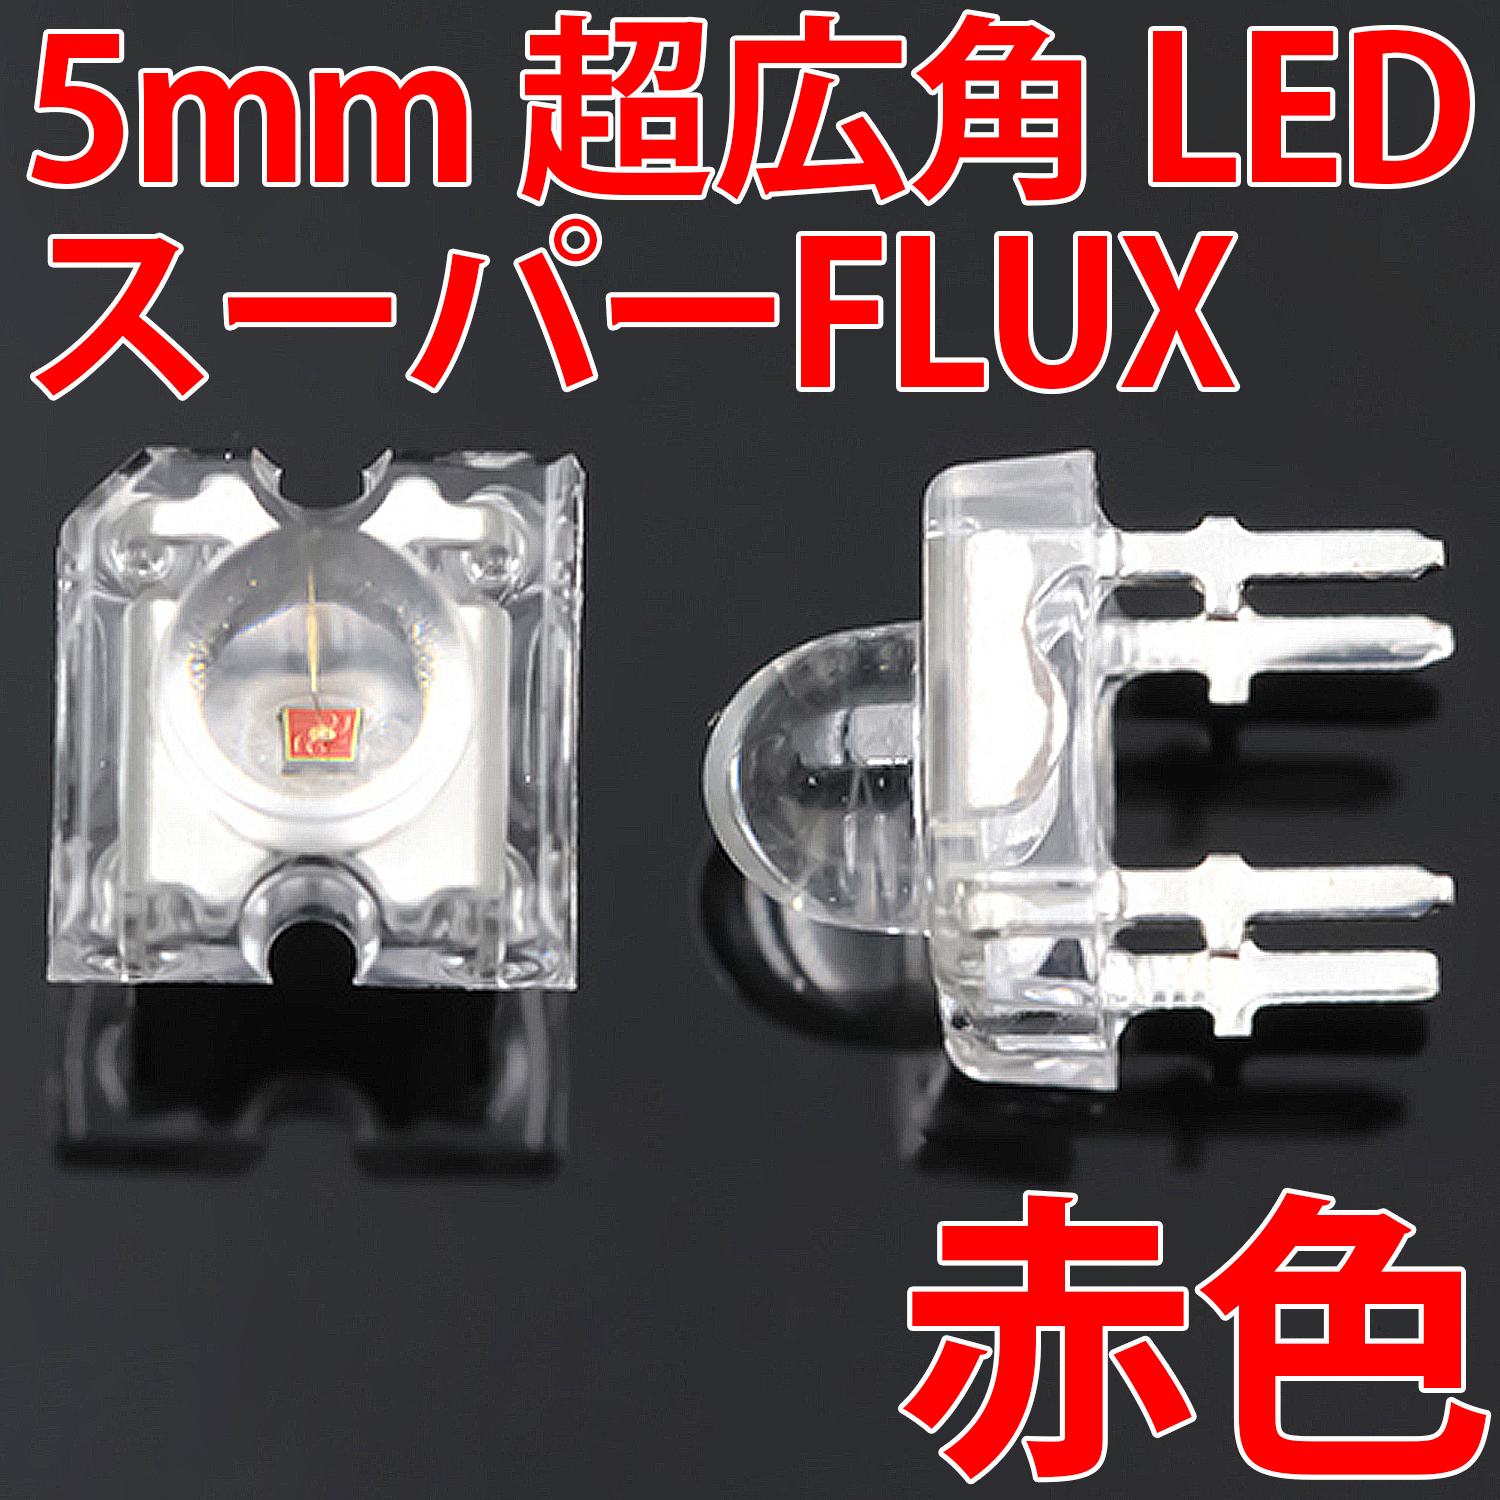 5mm Super Flux LED red color red red high luminance transparent clear lens clear top super-discount LED lamp,LED fluorescent lamp,LED light . luminescence diode LED element 